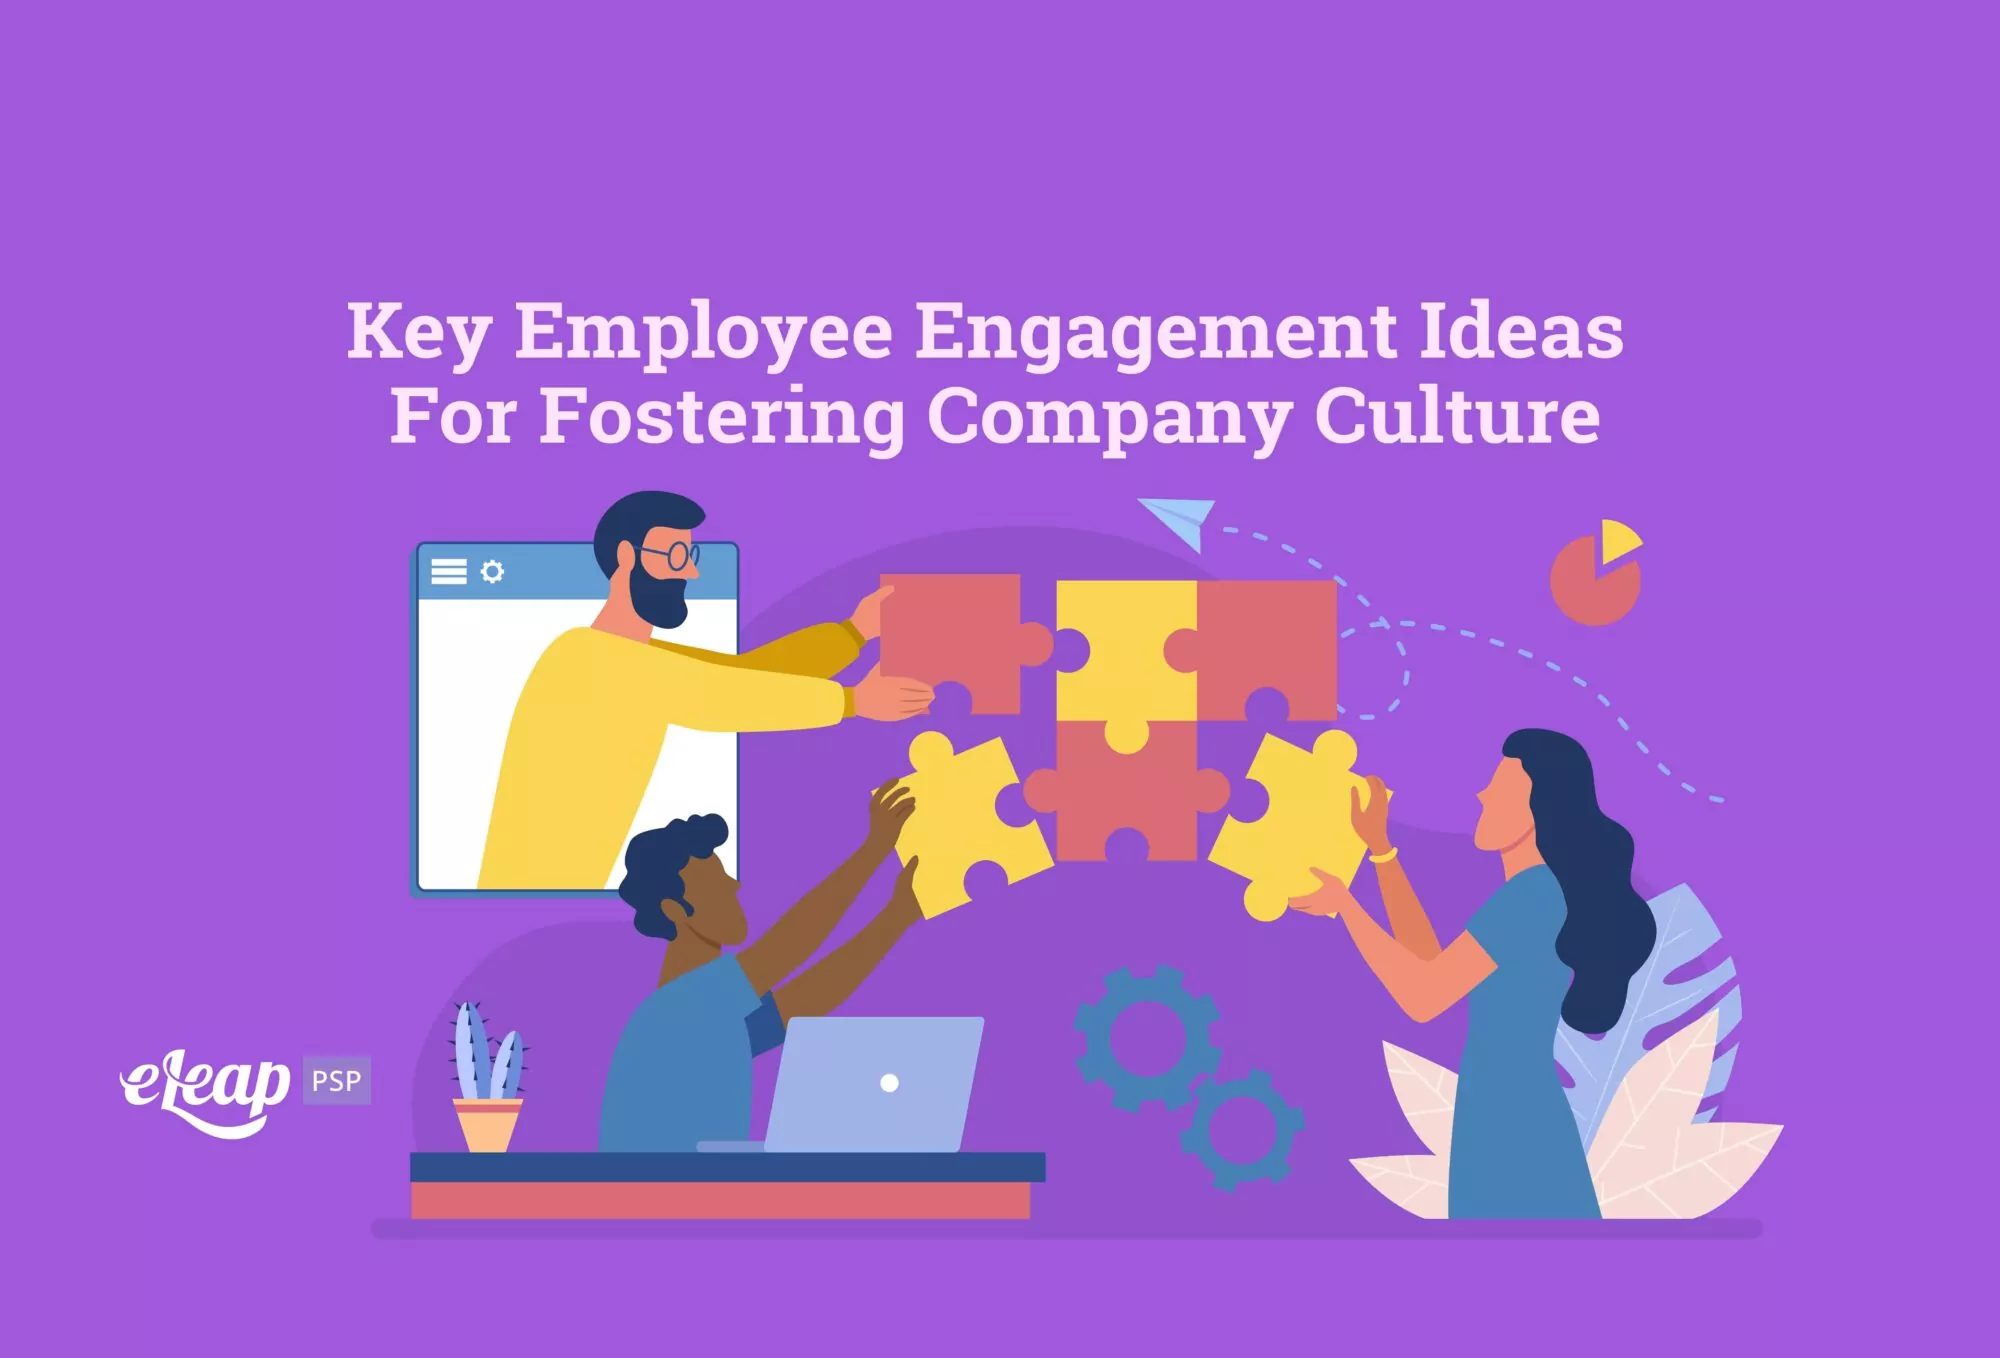 Key Employee Engagement Ideas For Fostering Company Culture